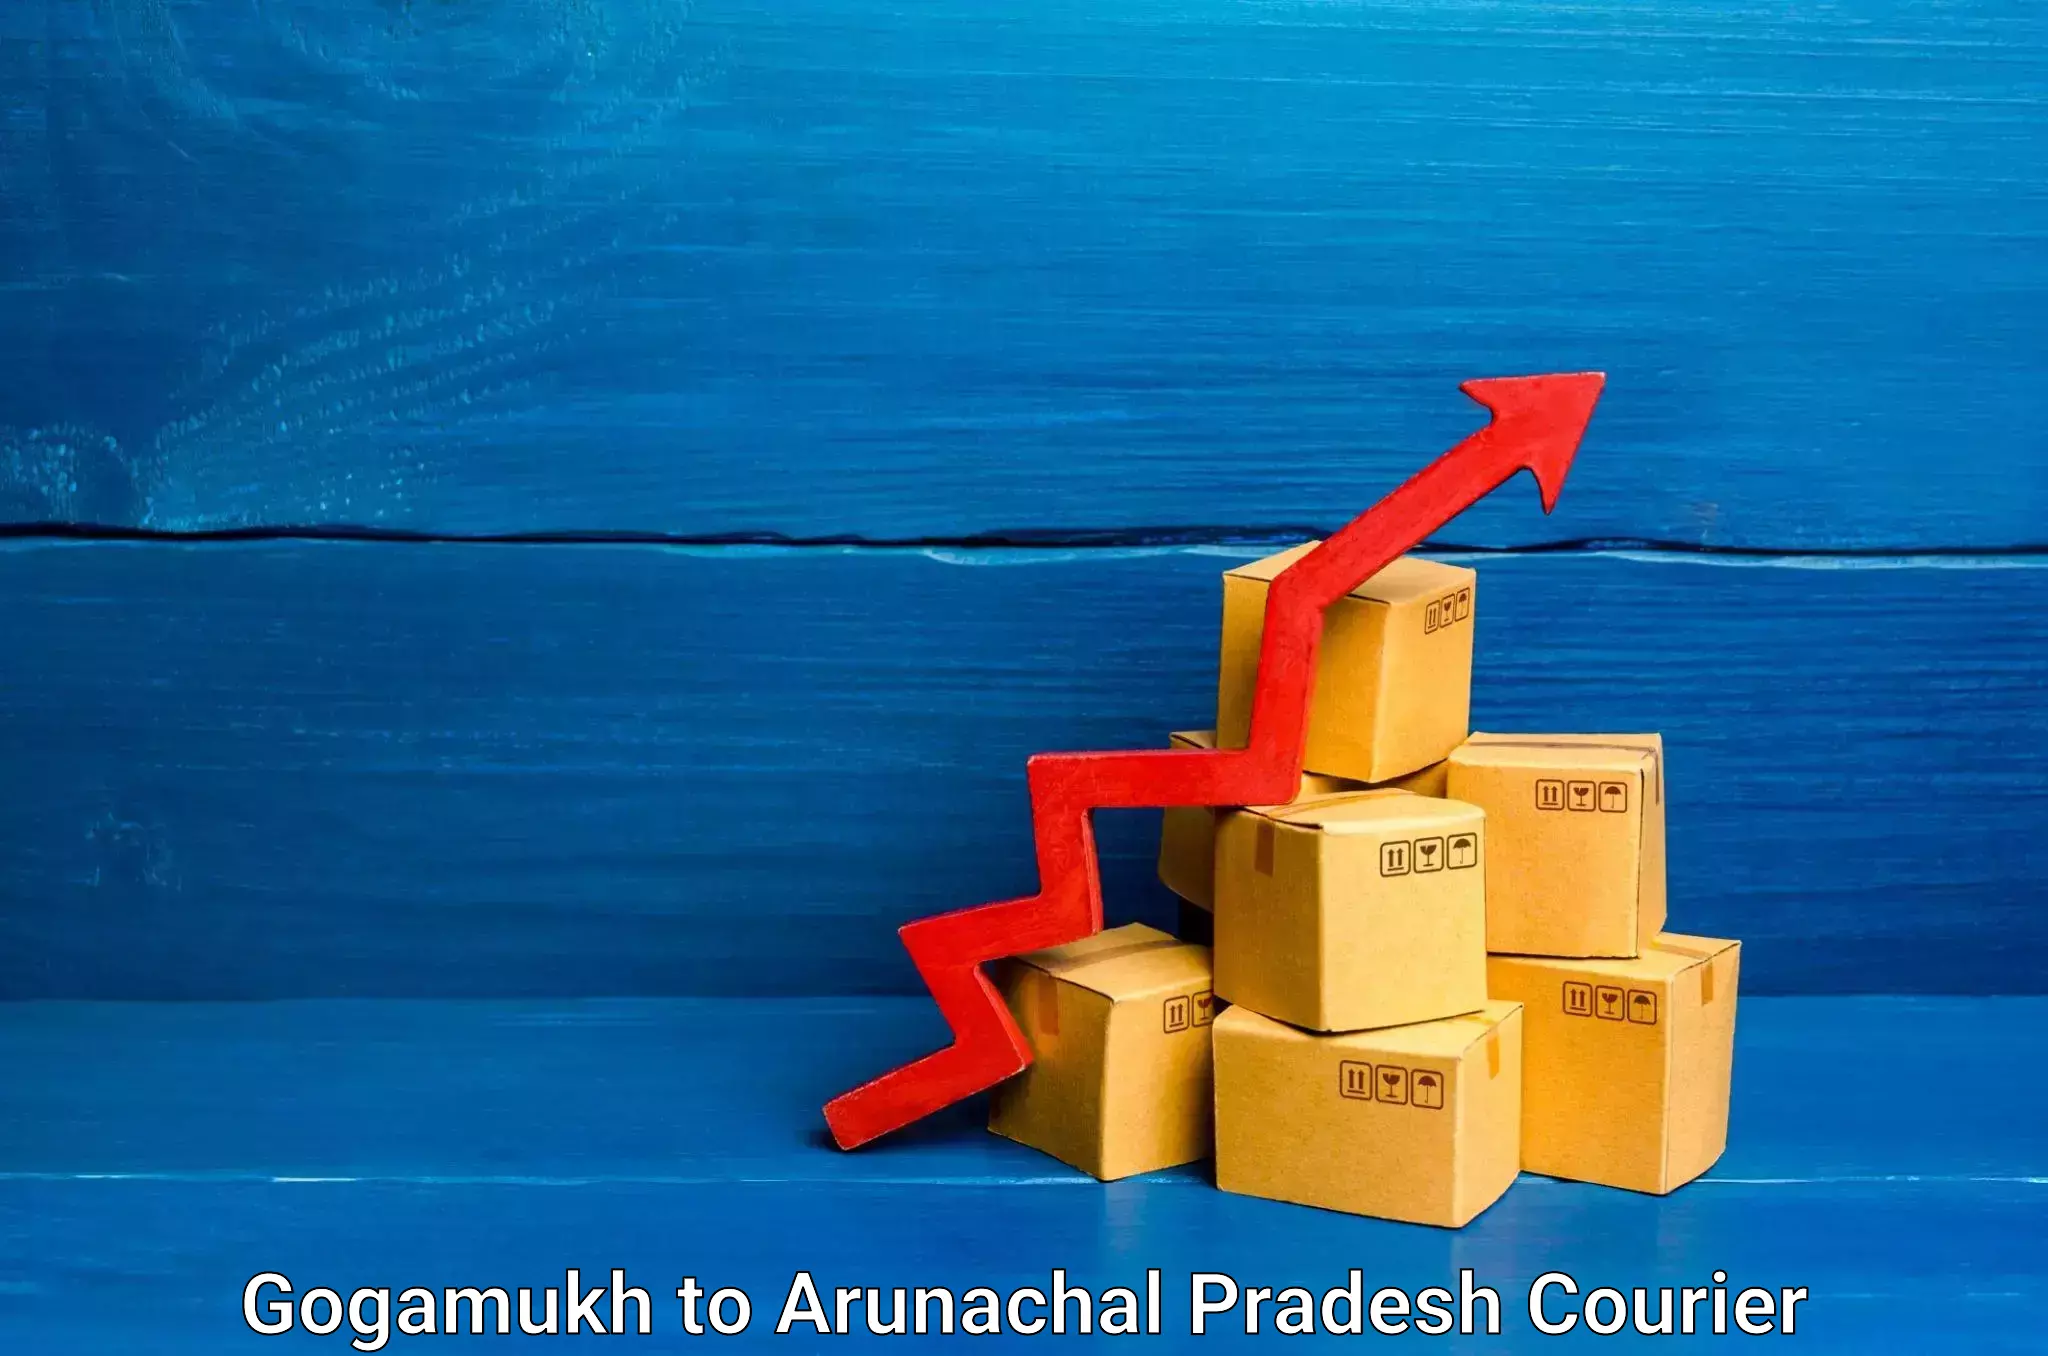 Comprehensive shipping services Gogamukh to Aalo